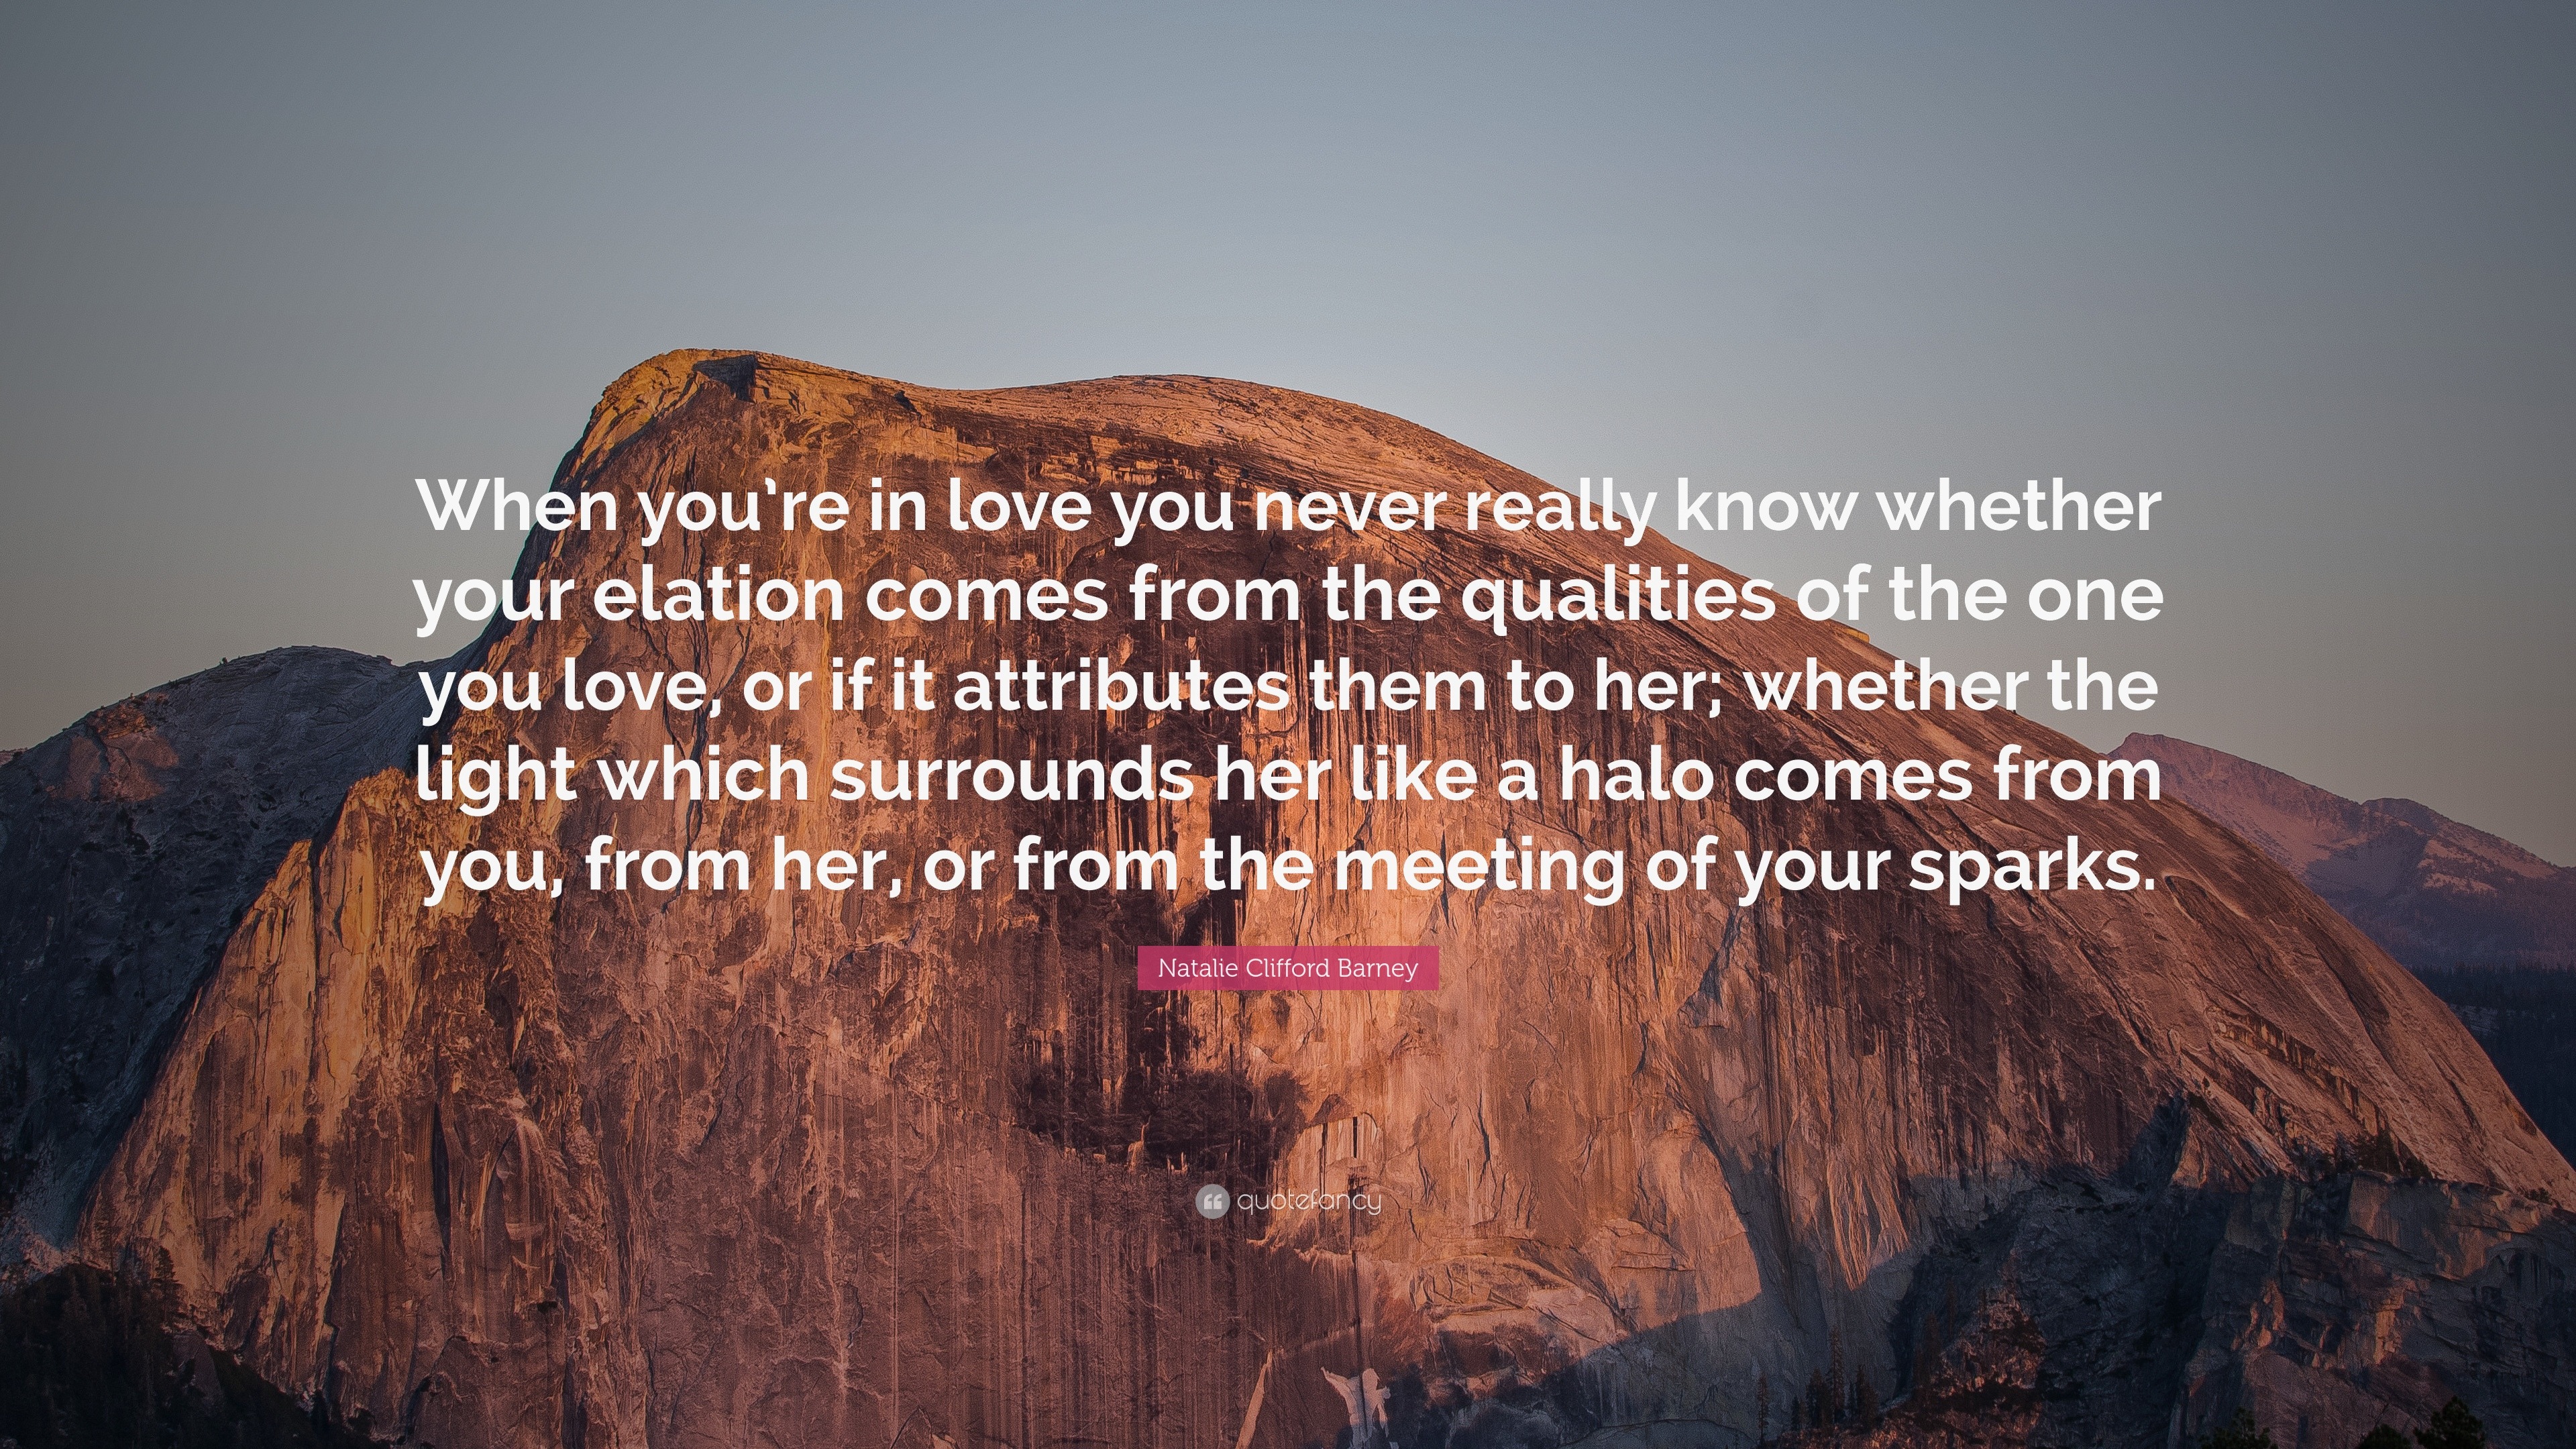 Natalie Clifford Barney Quote: “When you’re in love you never really ...